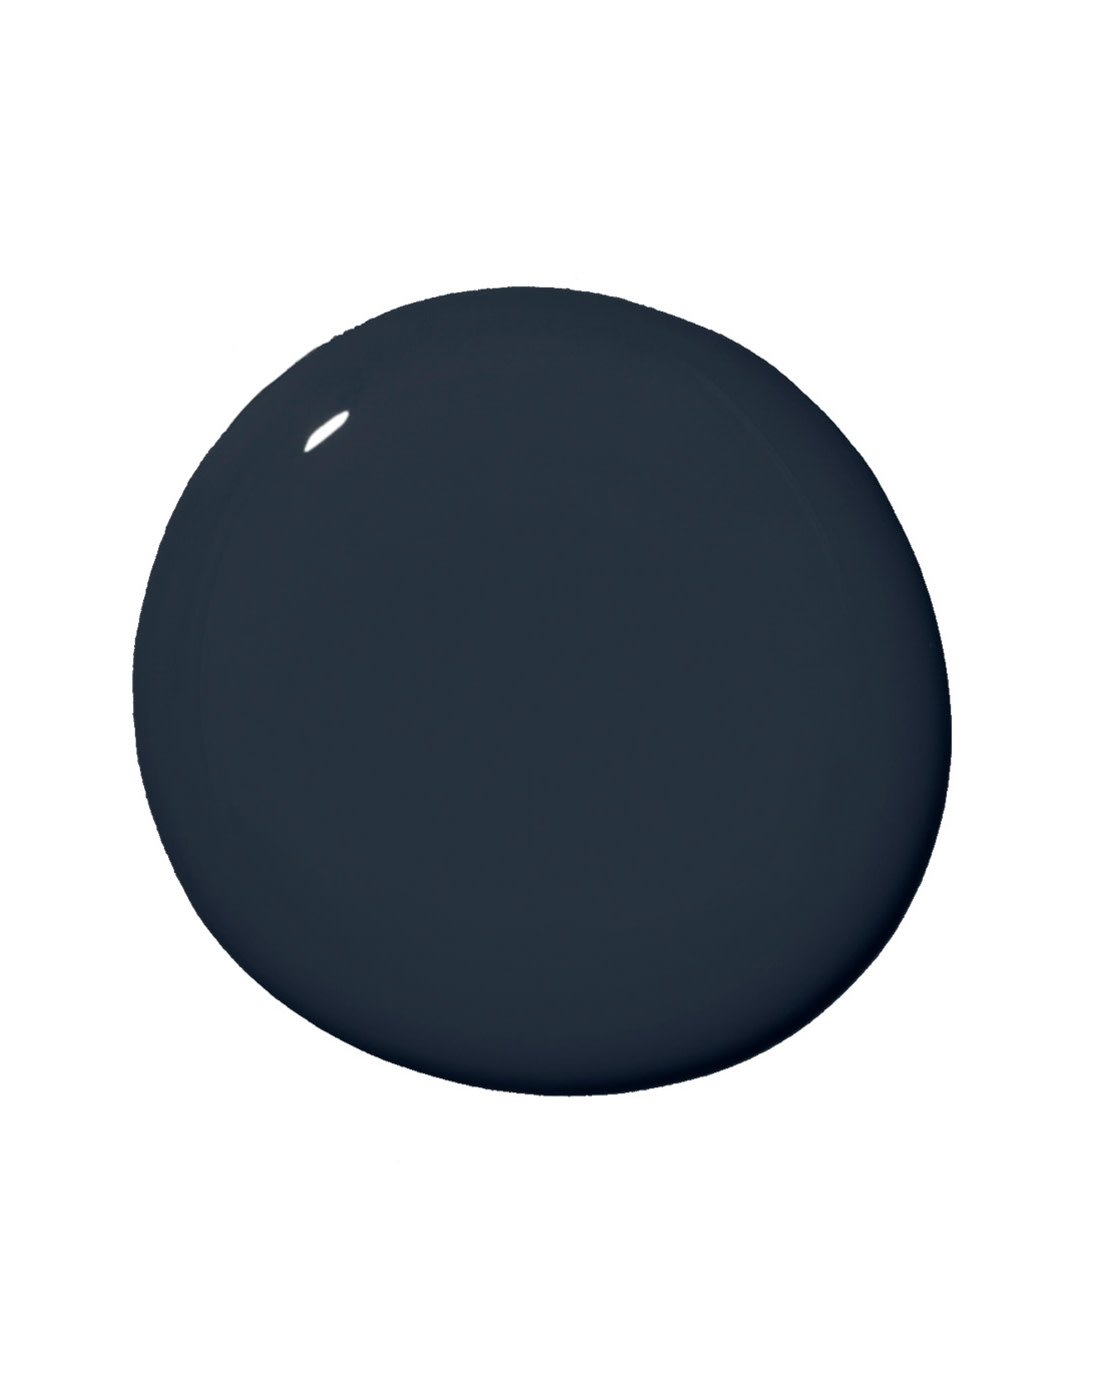 Clare Paint - Goodnight Moon - Swatch - Image 0